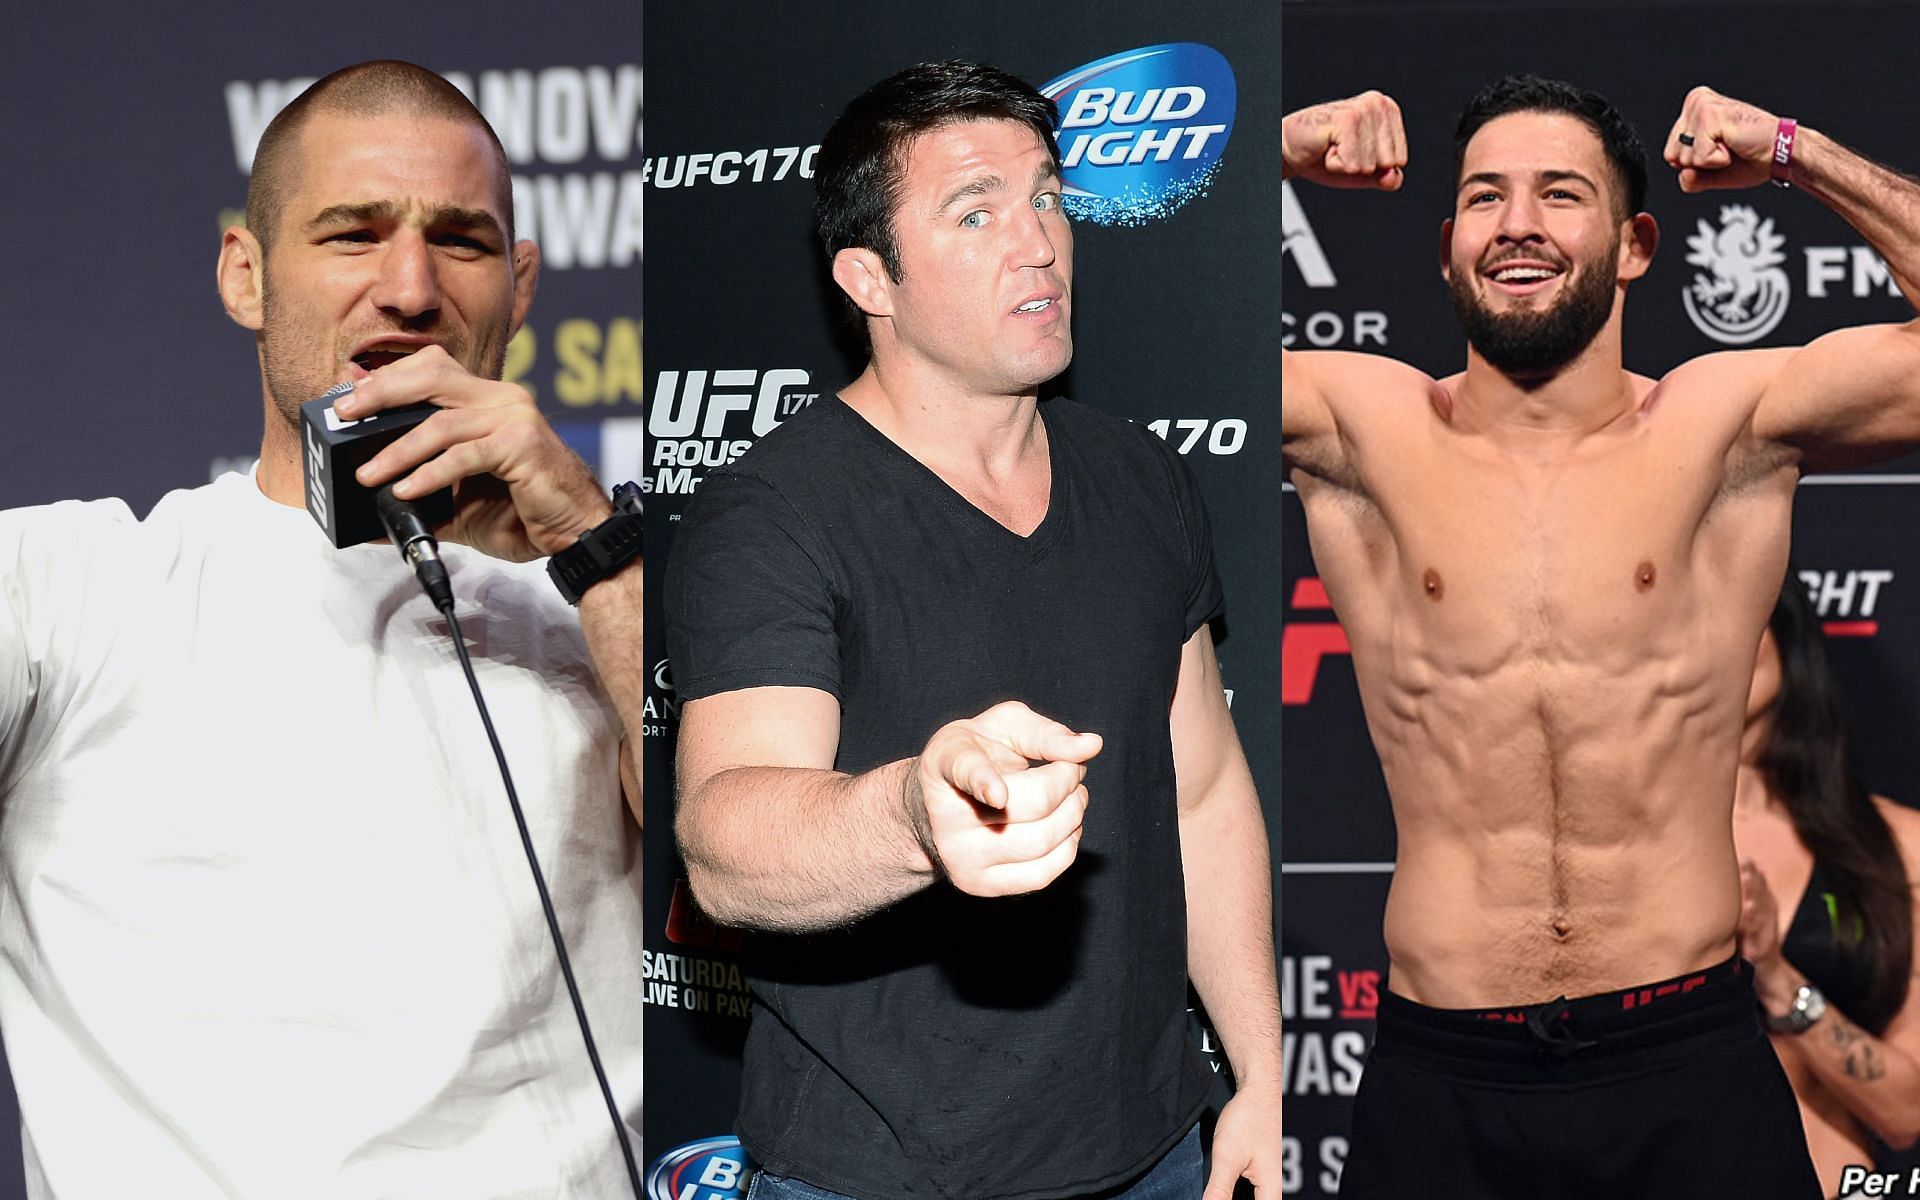 From the left - Sean Strickland, Chael Sonnen and Nassourdine Imavov [Image Courtesy: Getty Images and USA Today Sports]